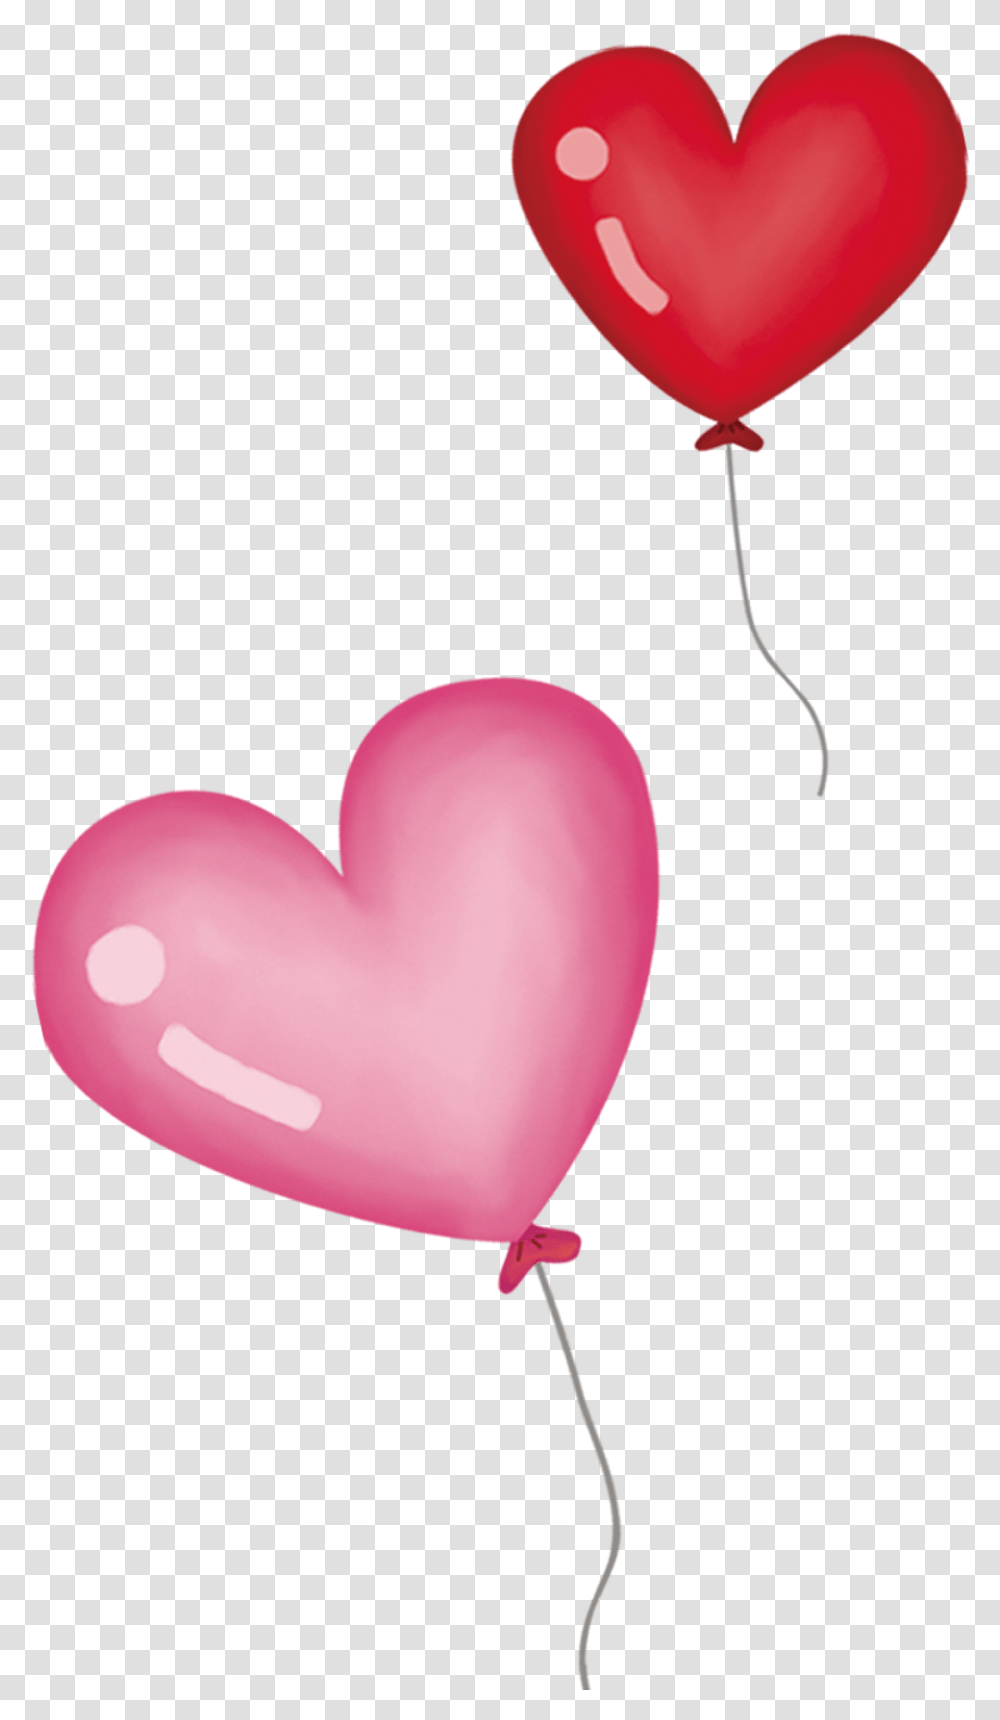 Download Heart Pink Toy Red Transprent Free Globo Duolingo Love, Balloon, Cushion Transparent Png